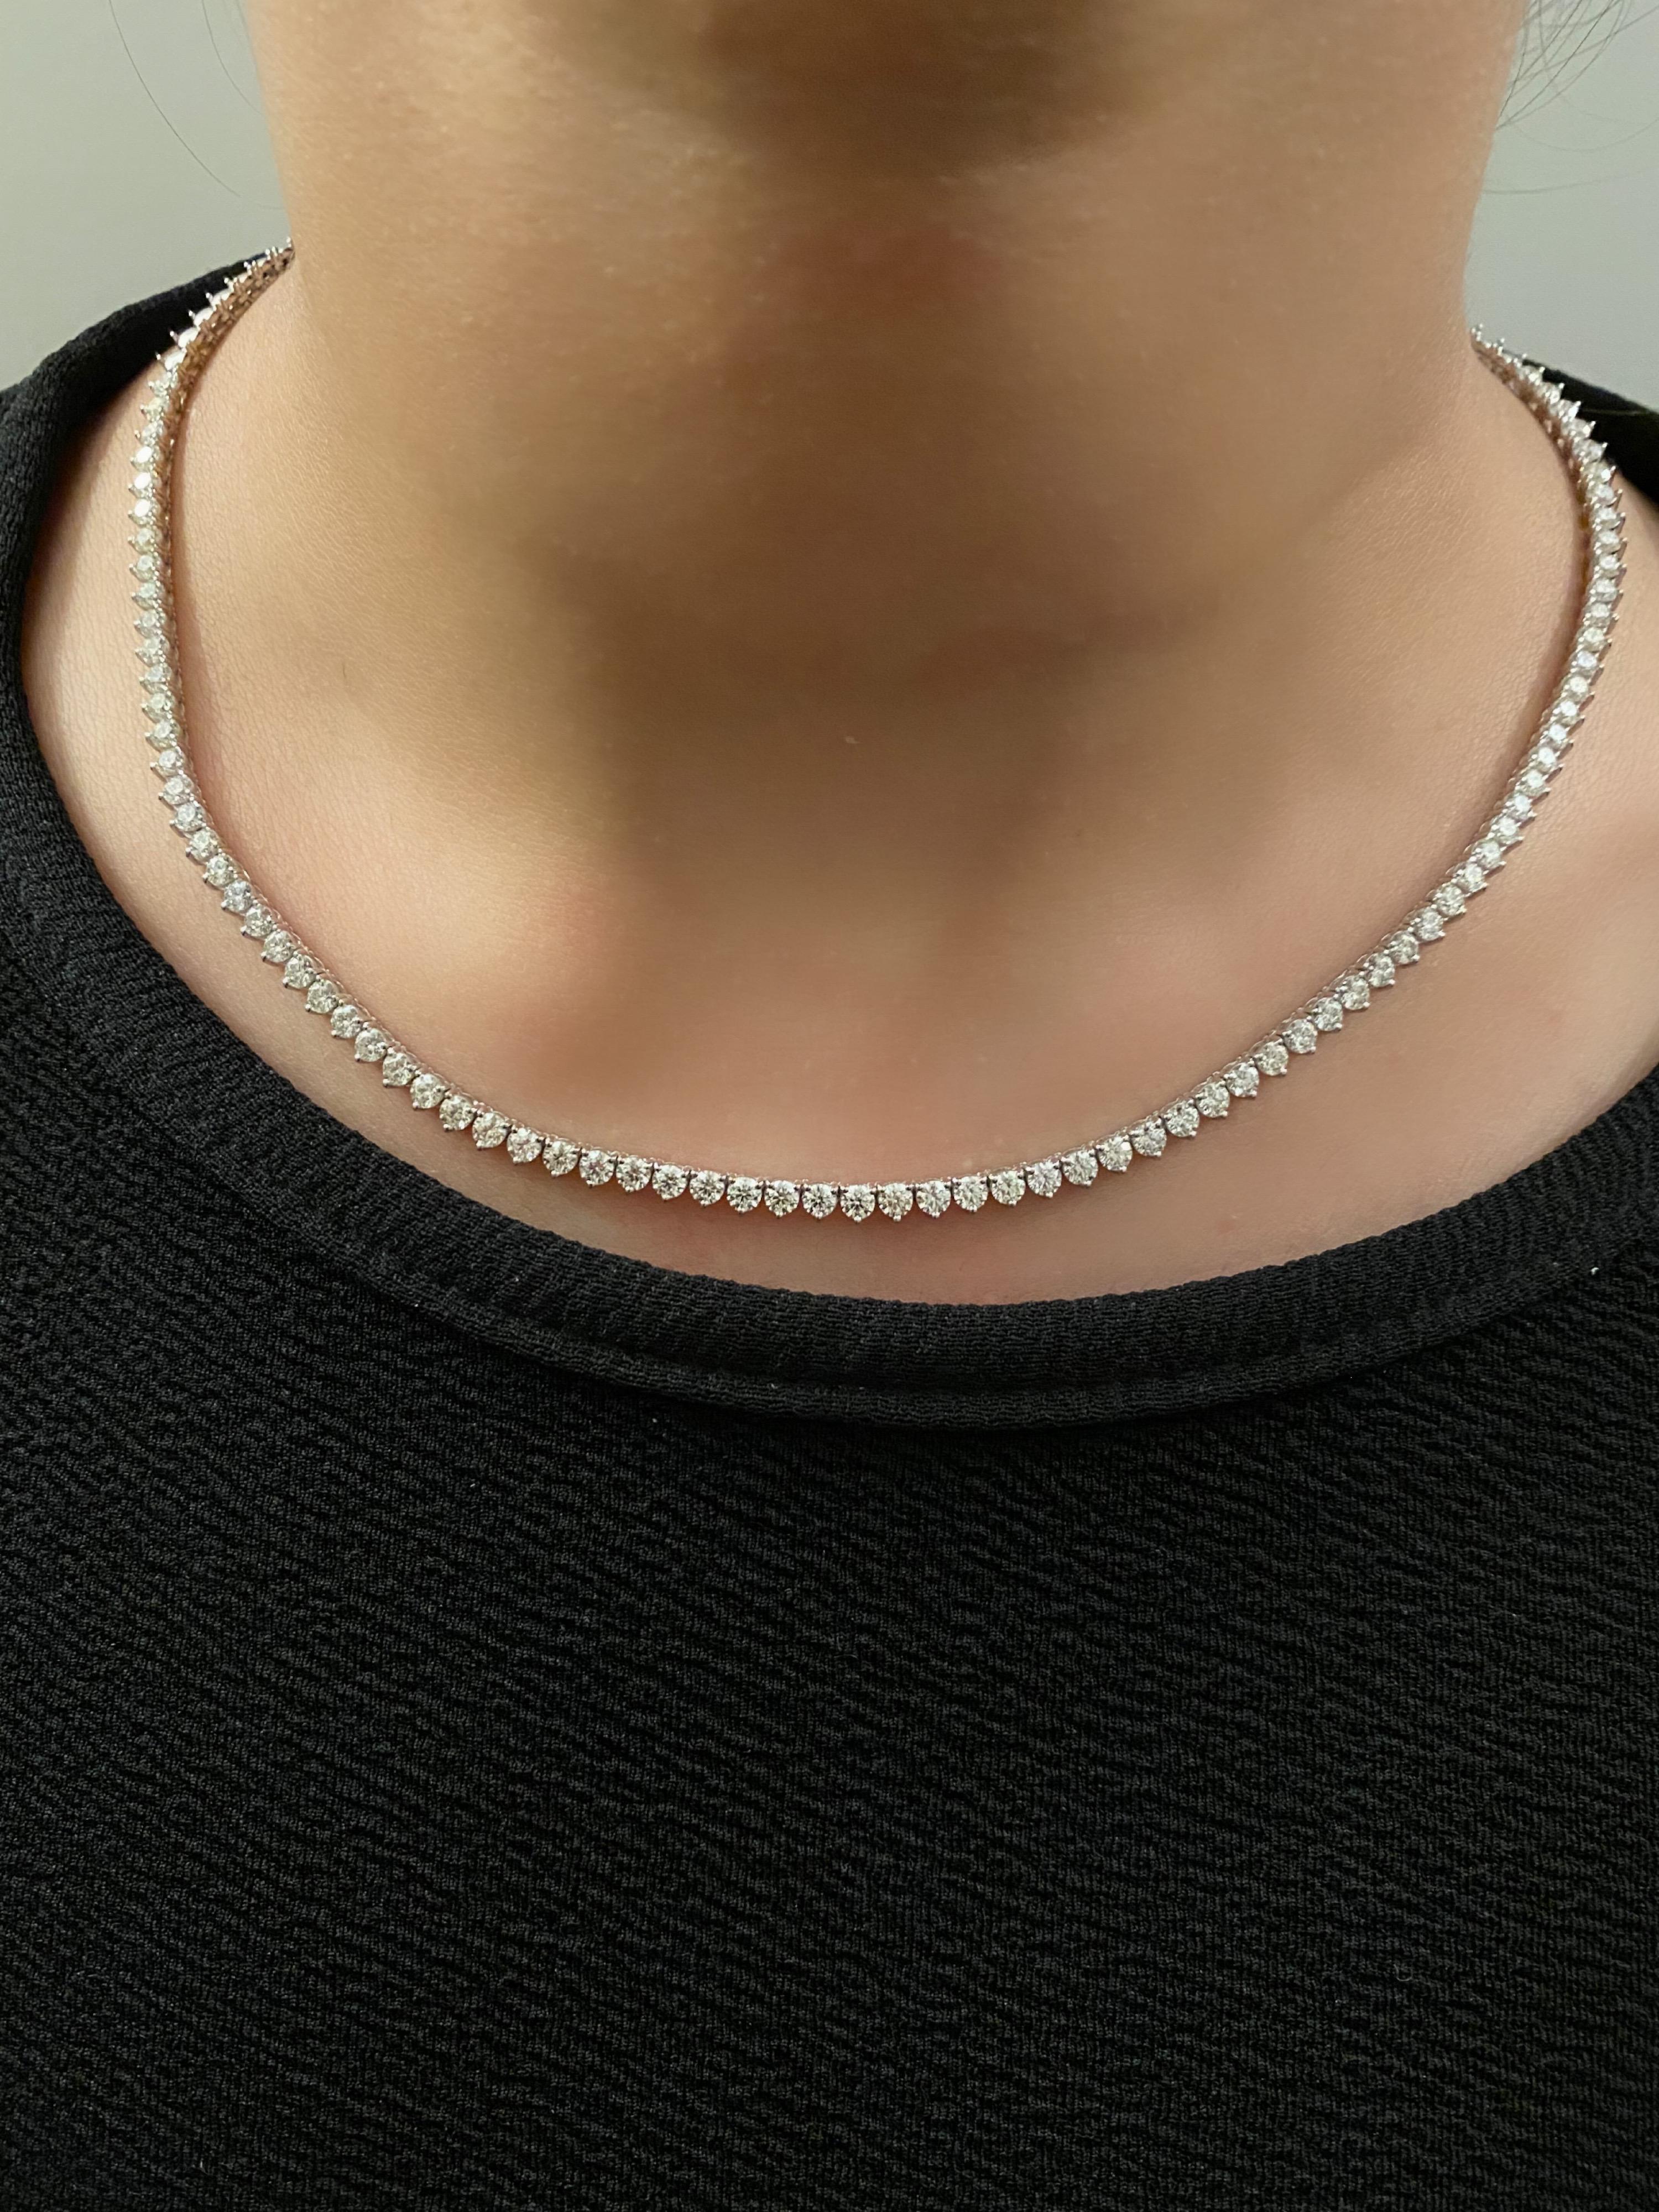 Made from perfectly cut hearts and arrow diamonds, this tennis single-line necklace guarantees luster and sparkle, like none other.

Diamond Details
Shape: Round 
Color: F 
Clarity: VVS2 
Weight: 8 Carats 

Necklace Details
18K Gold 
